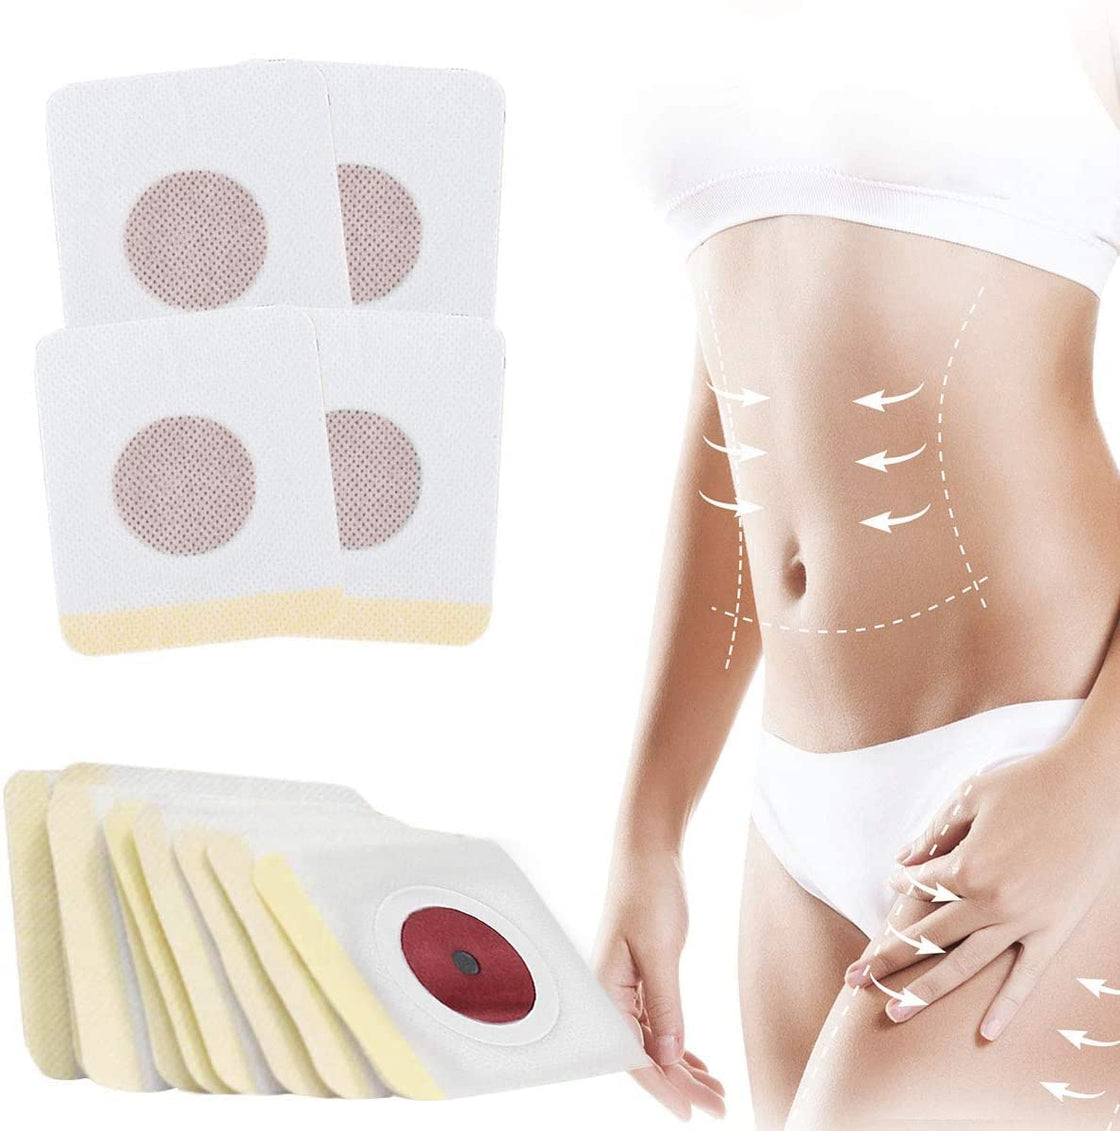 Slimming Patch10 pcs Two Choices Magnet Weight Reduce Fat Burning Lose Weight Navel Sticker Belly Slim Patch